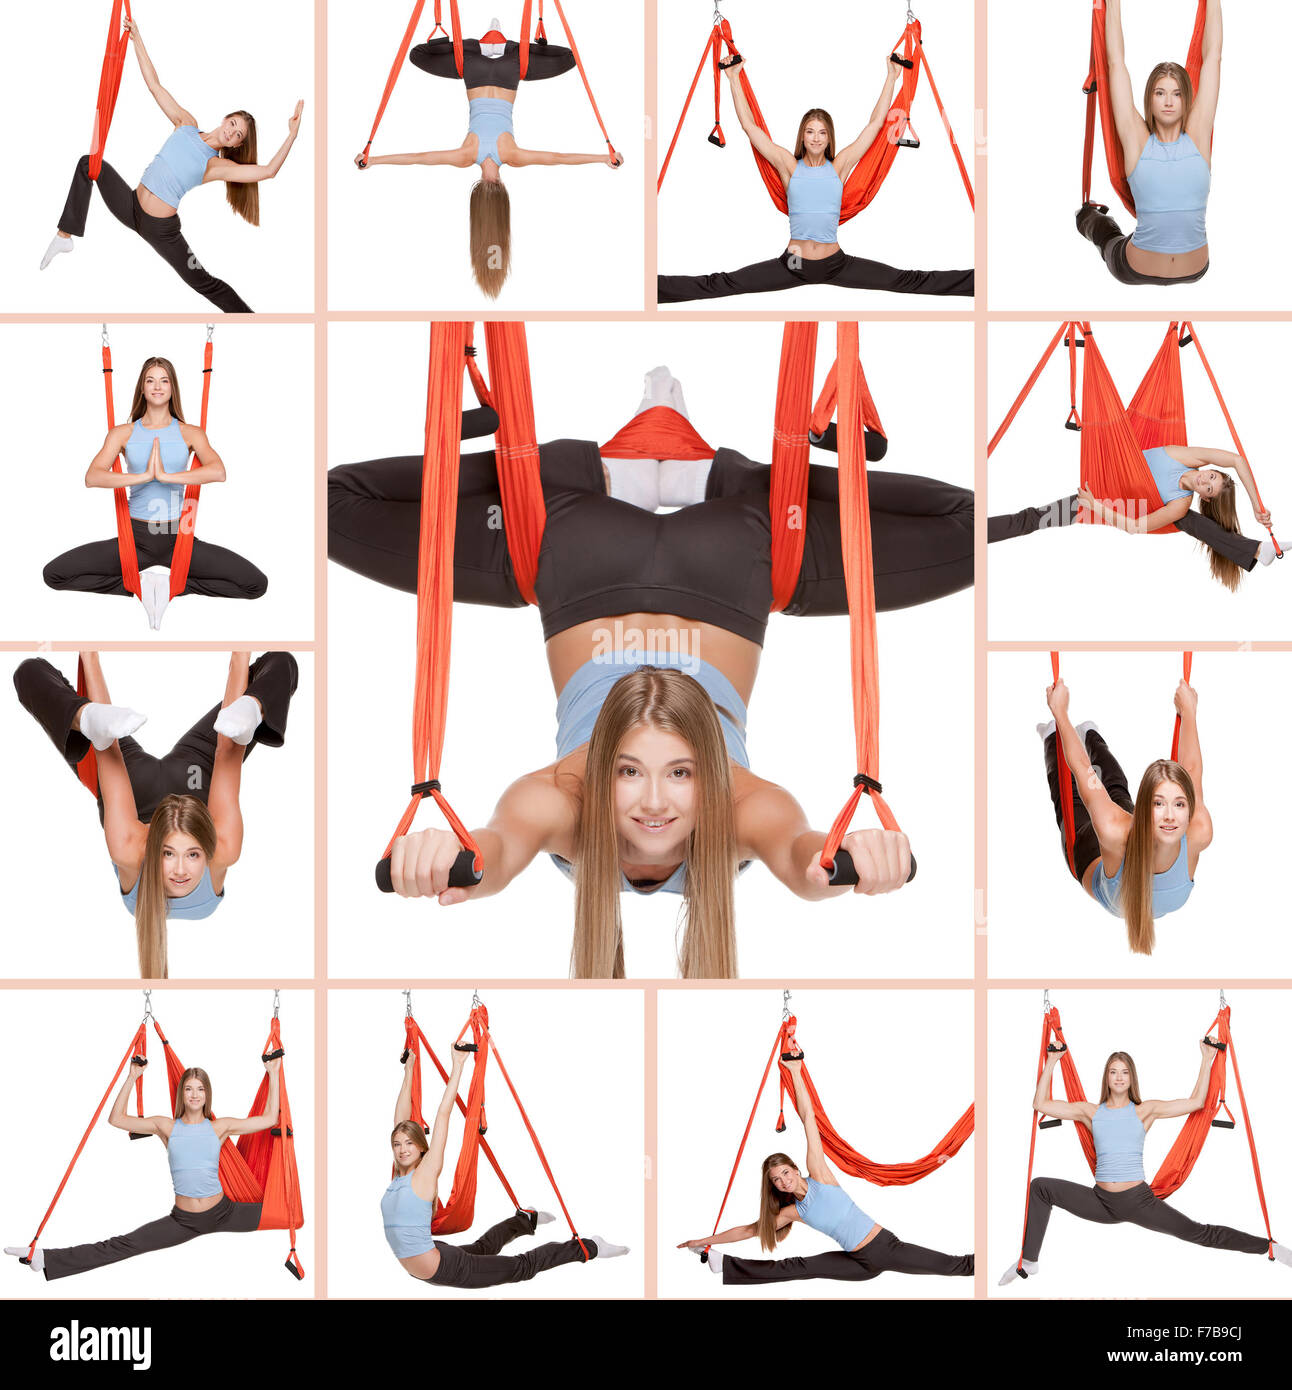 11 Essential Aerial Yoga Poses to Learn Today - Aerial Yoga Zone